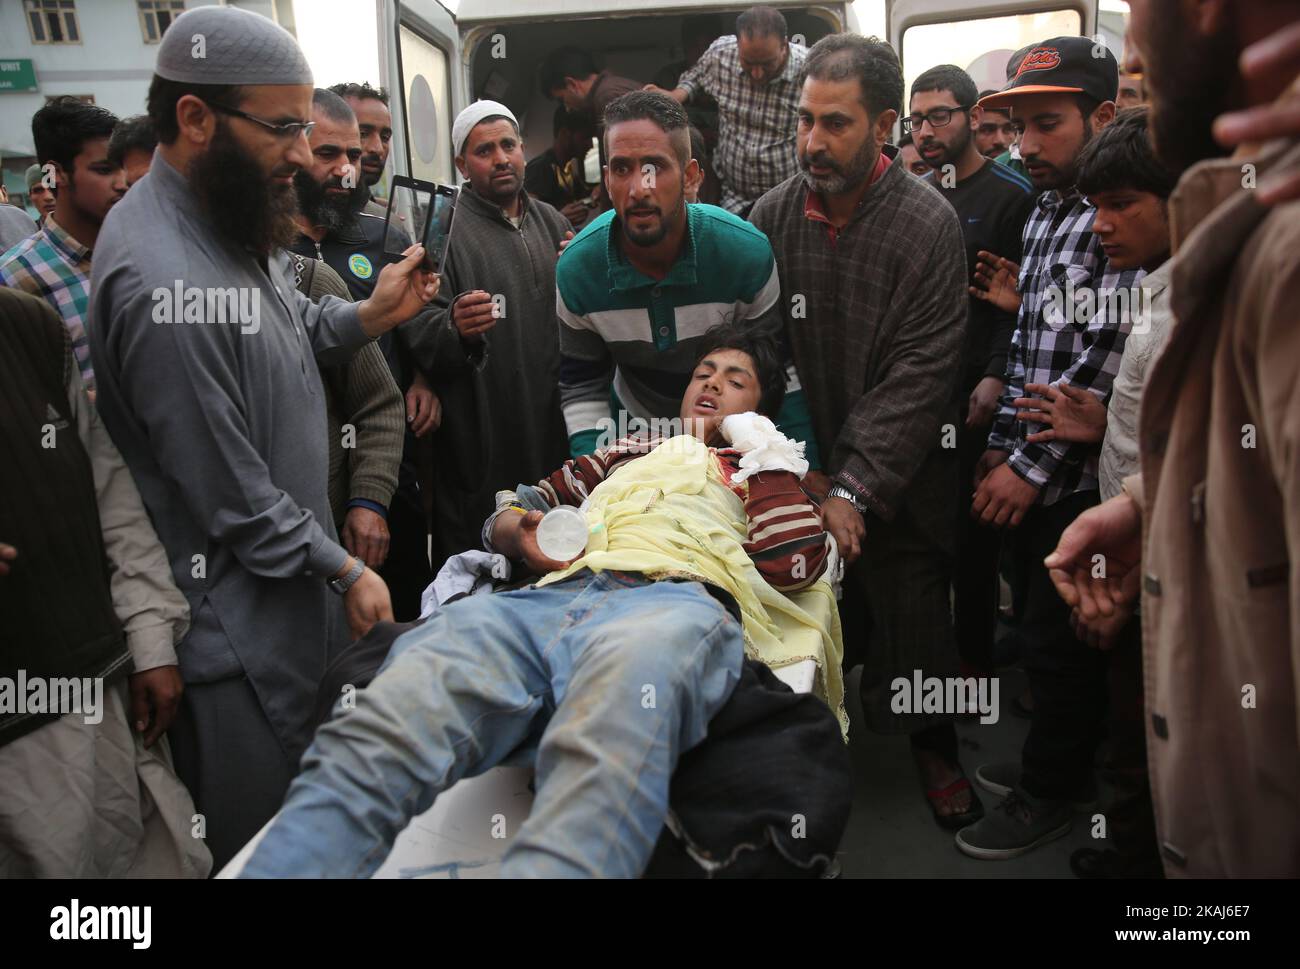 Kashmiri people take a wounded person to a local hospital in Srinagar, summer capital of Indian-controlled Kashmir, April 15, 2016. A teenager was killed and several others wounded Friday after army troops fired on civilians during protests in Indian-controlled Kashmir, officials said. (Xinhua/Javed Dar) ****Authorized by ytfs****  (Photo by Xinhua) Stock Photo